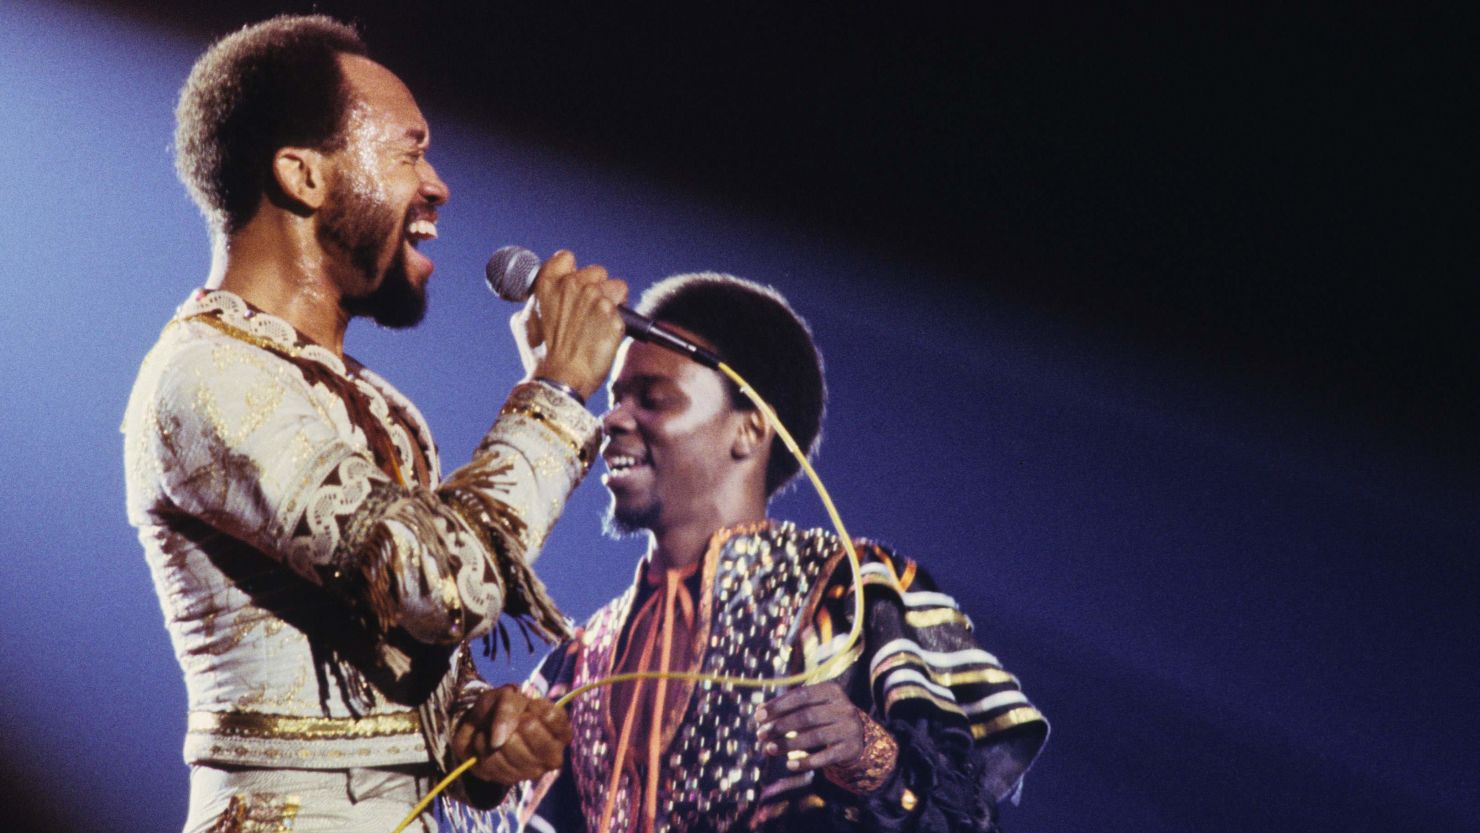 The late Earth, Wind & Fire founder, Maurice White, is pictured during a performance. 